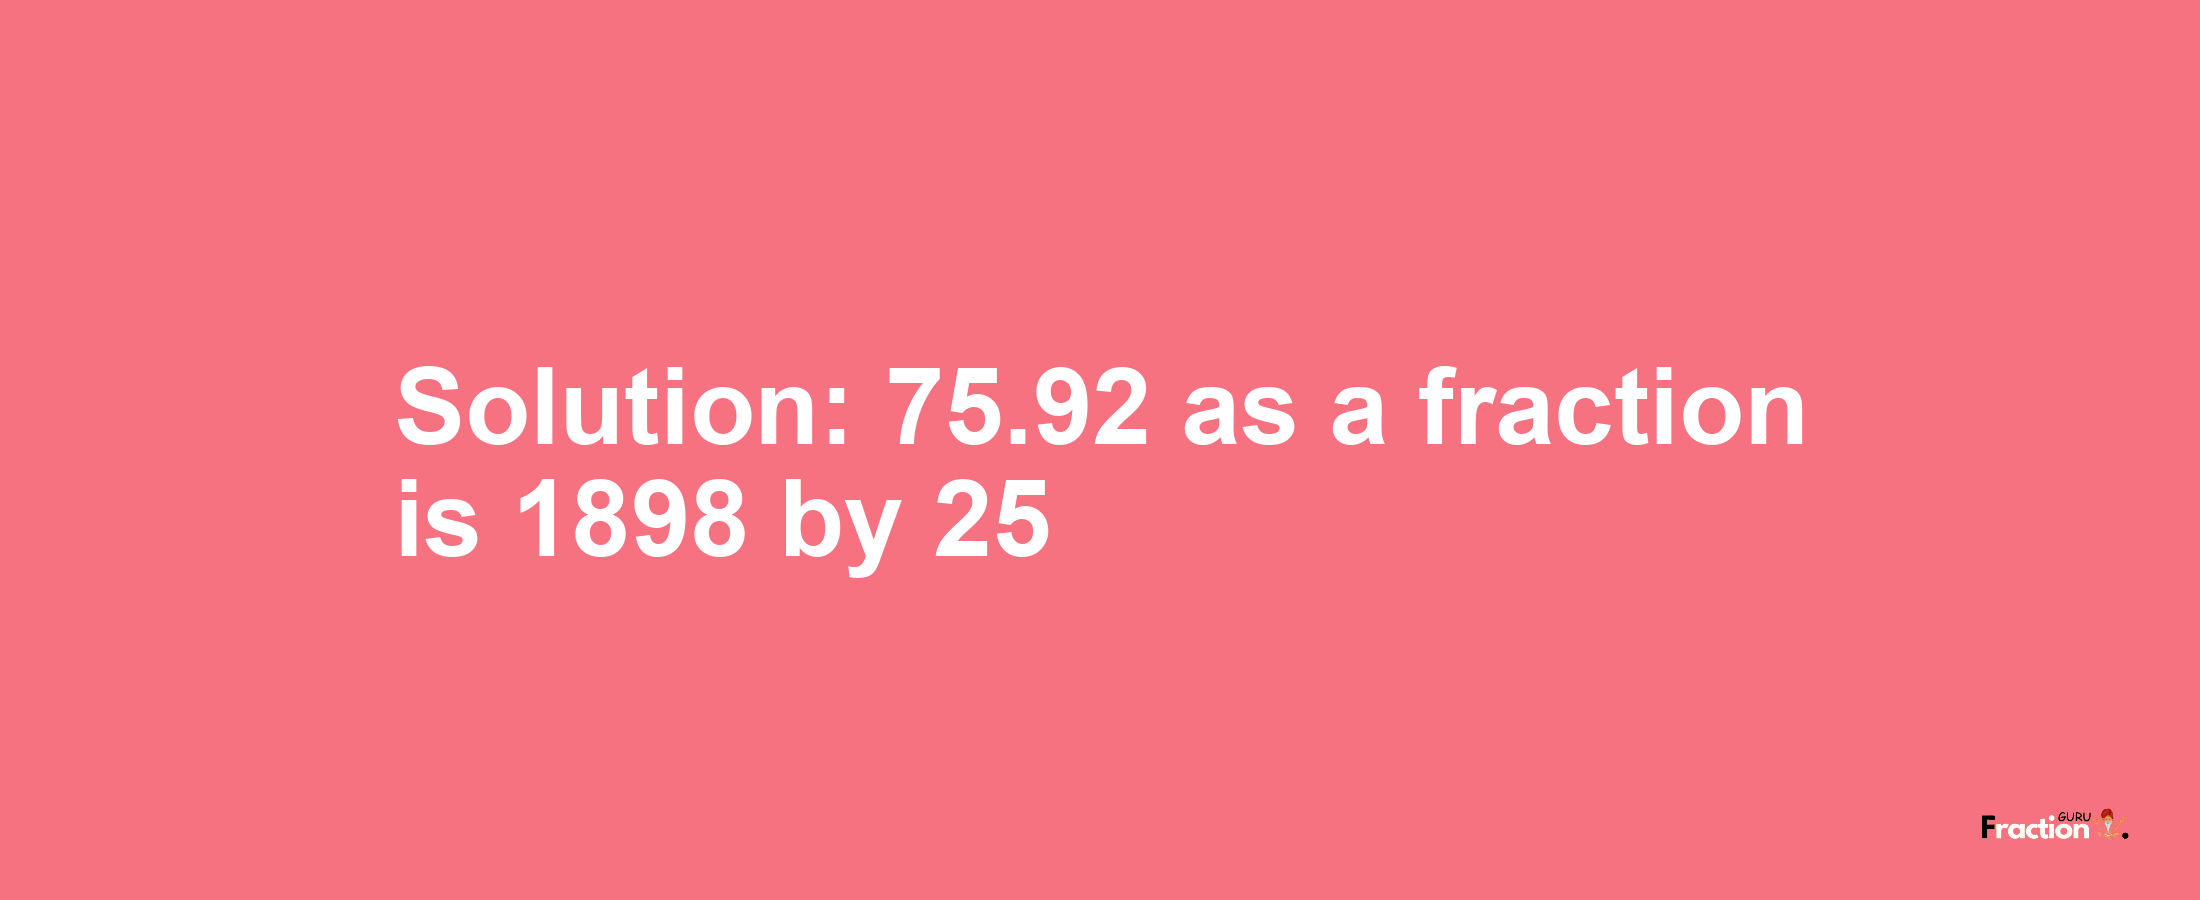 Solution:75.92 as a fraction is 1898/25